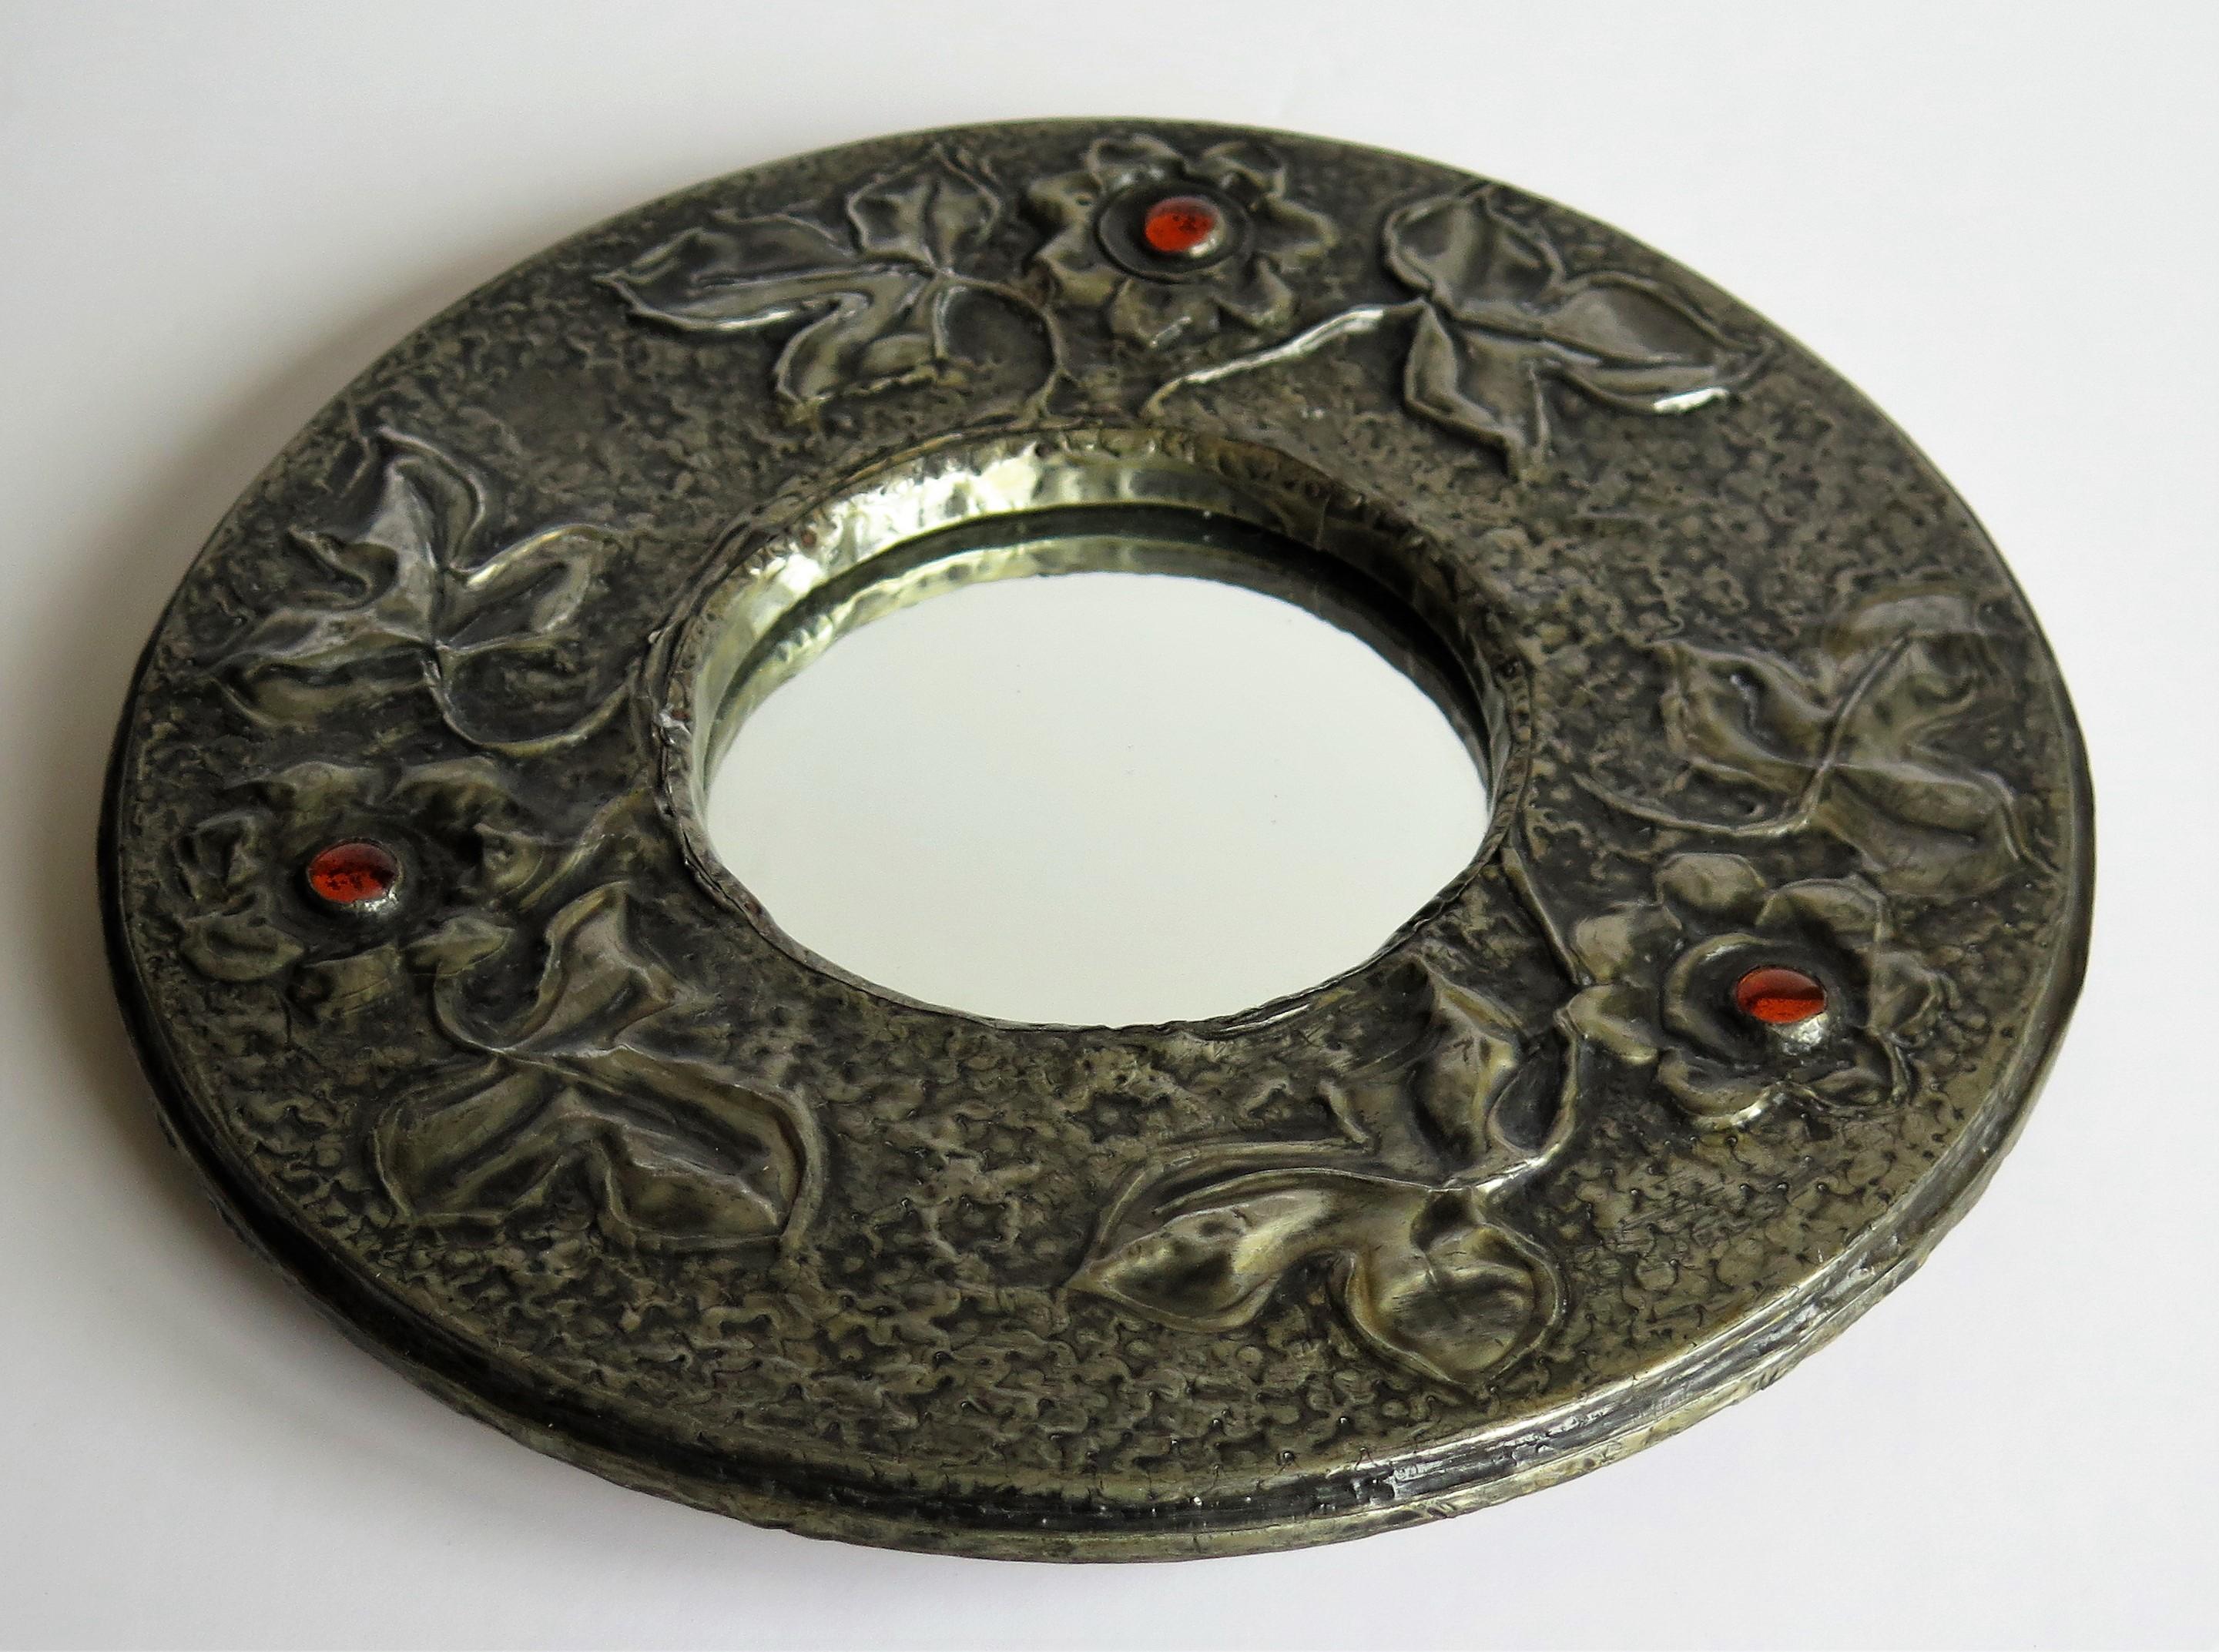 English Pewter round Wall Mirror Arts and Crafts with Amber Cabochons, circa 1900